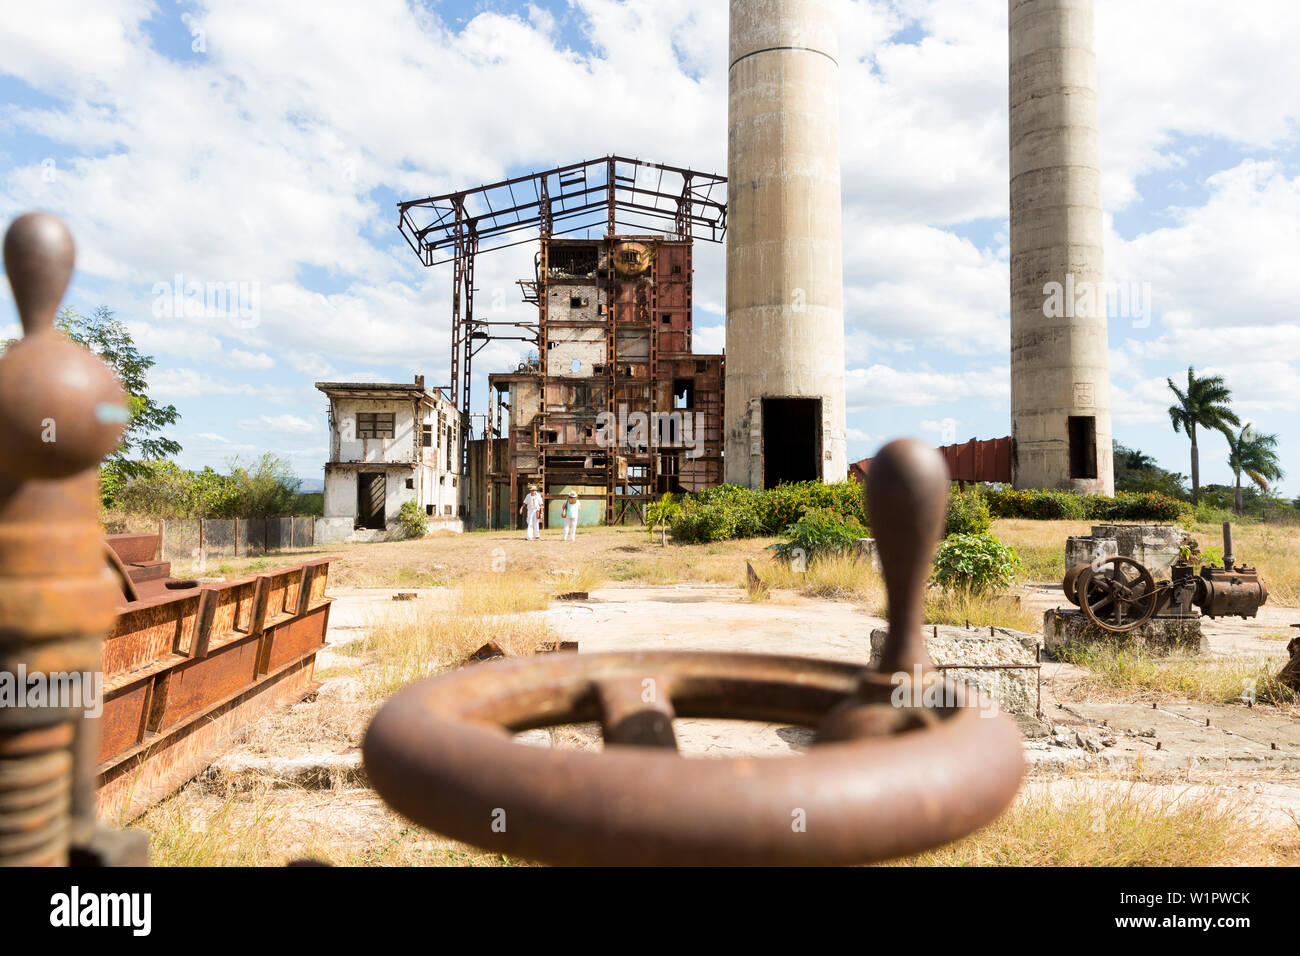 Formerly a sugarcane factory, surrounded by sugarcane plantations, tour into the Valle de los Ingenios, with a steam locomotive, family travel to Cuba Stock Photo